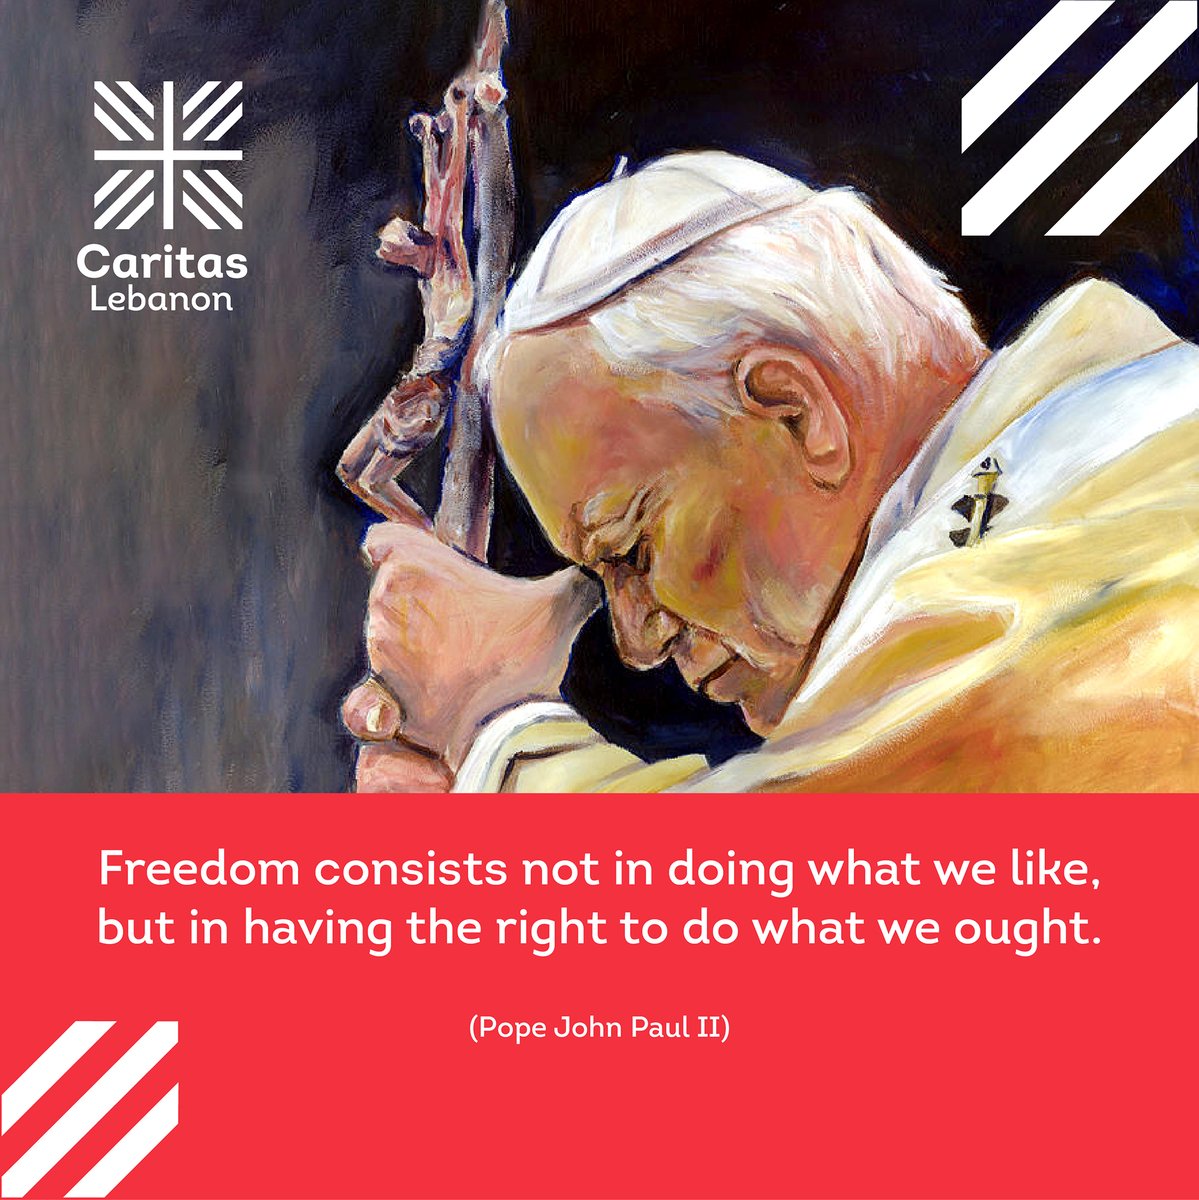 'Freedom consists not in doing what we like, but in having the right to do what we ought.' His Holiness Pope John Paul II #Freedom #JohnPaulII #Holiness #Quotes #Inspiration #Wisdom #Catholicism #Faith #Vatican #Pope #Legacy411